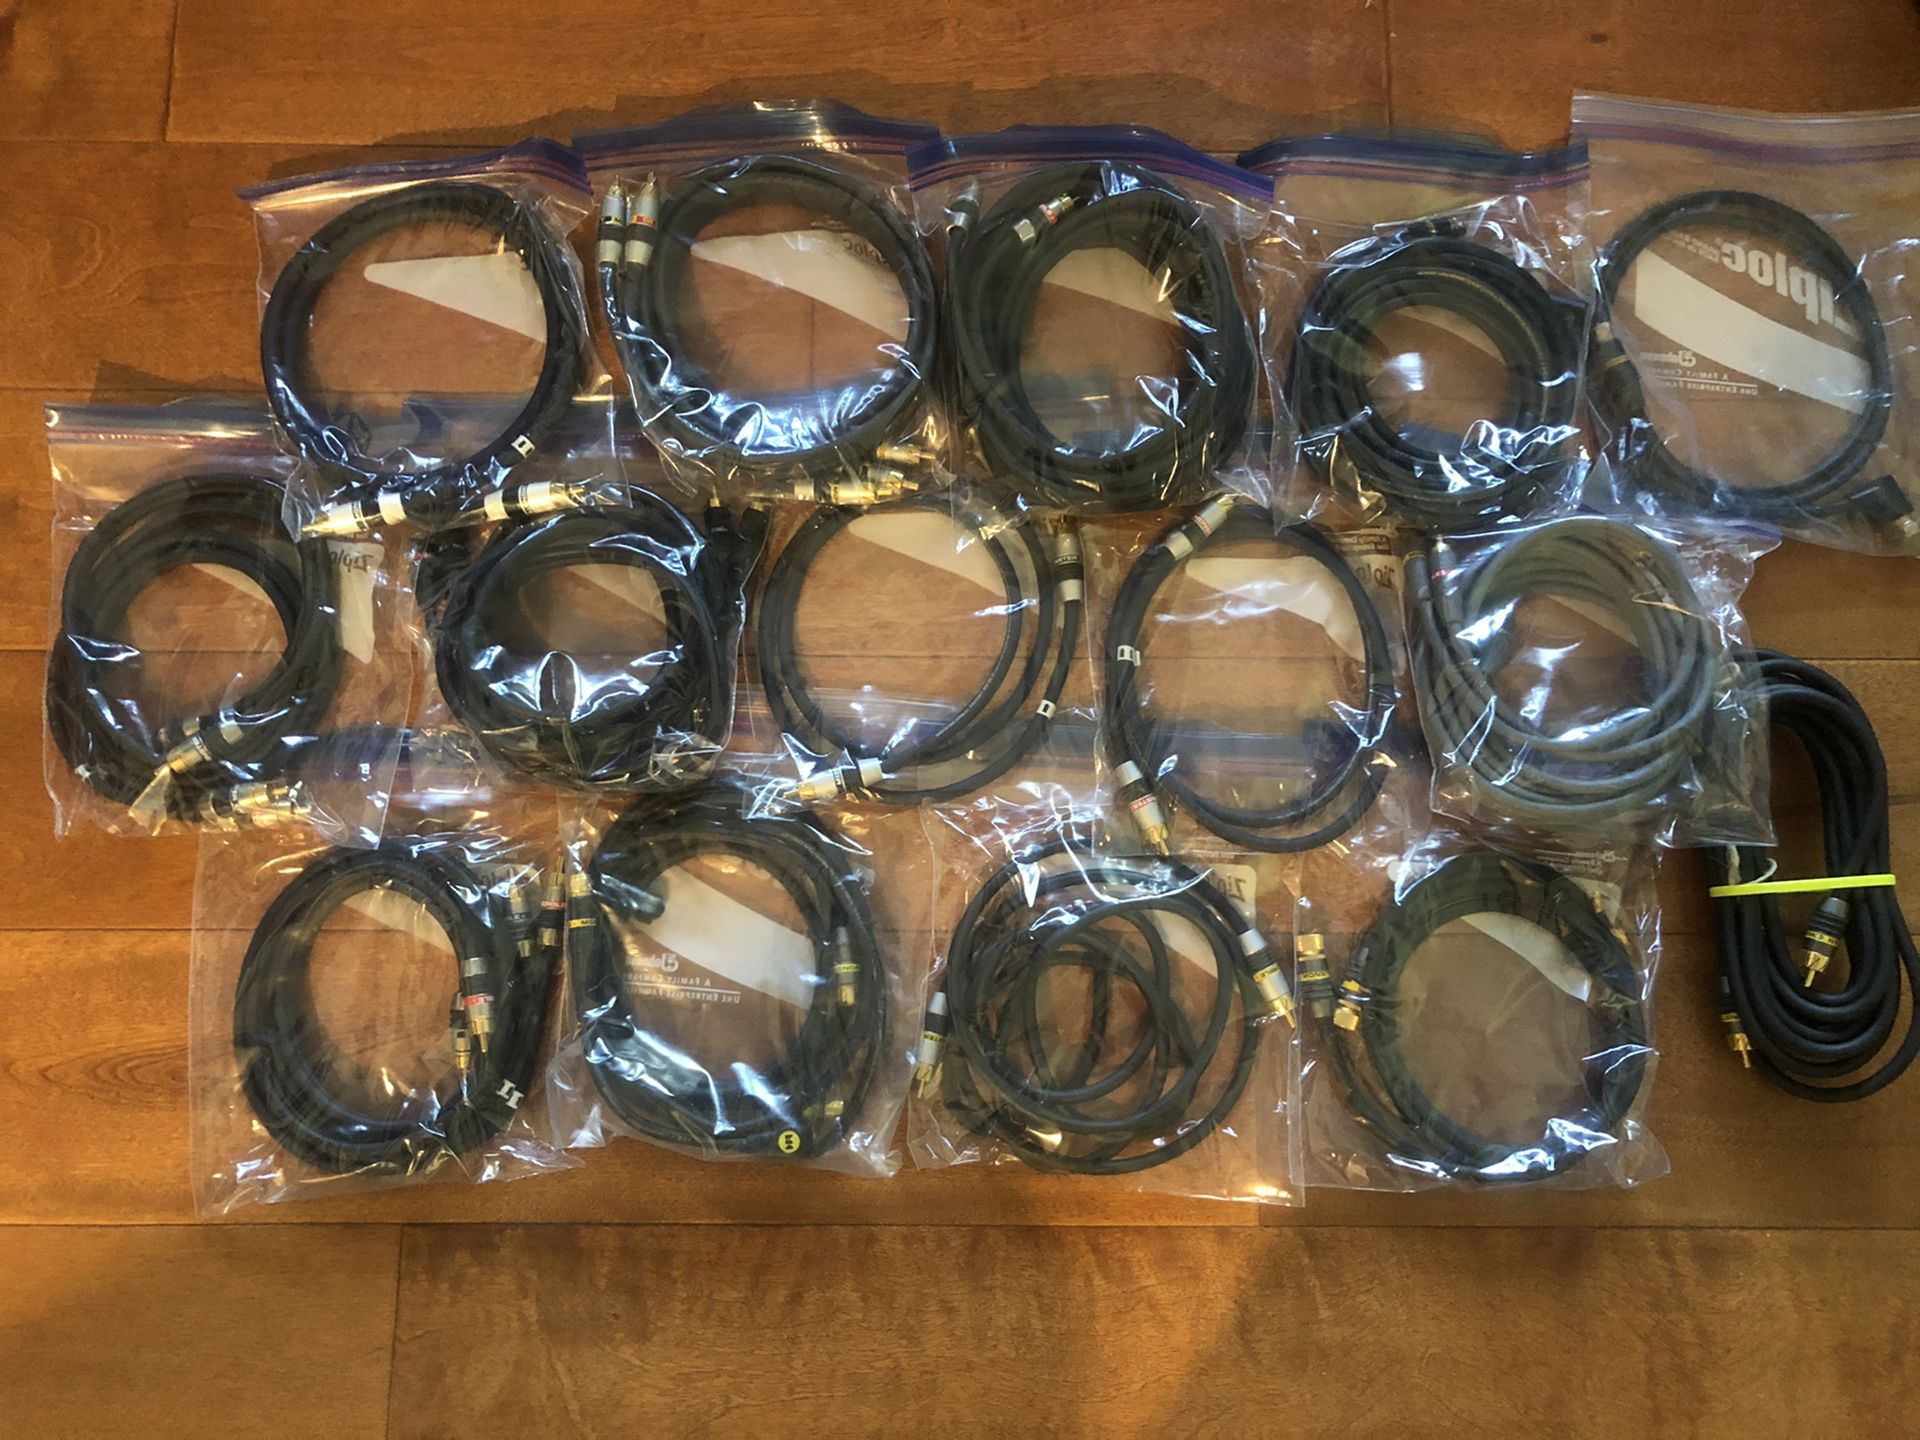 LOT of Monster Cables Interlink Video Audio RCA, Coaxial, S-Video, Composite, Digital